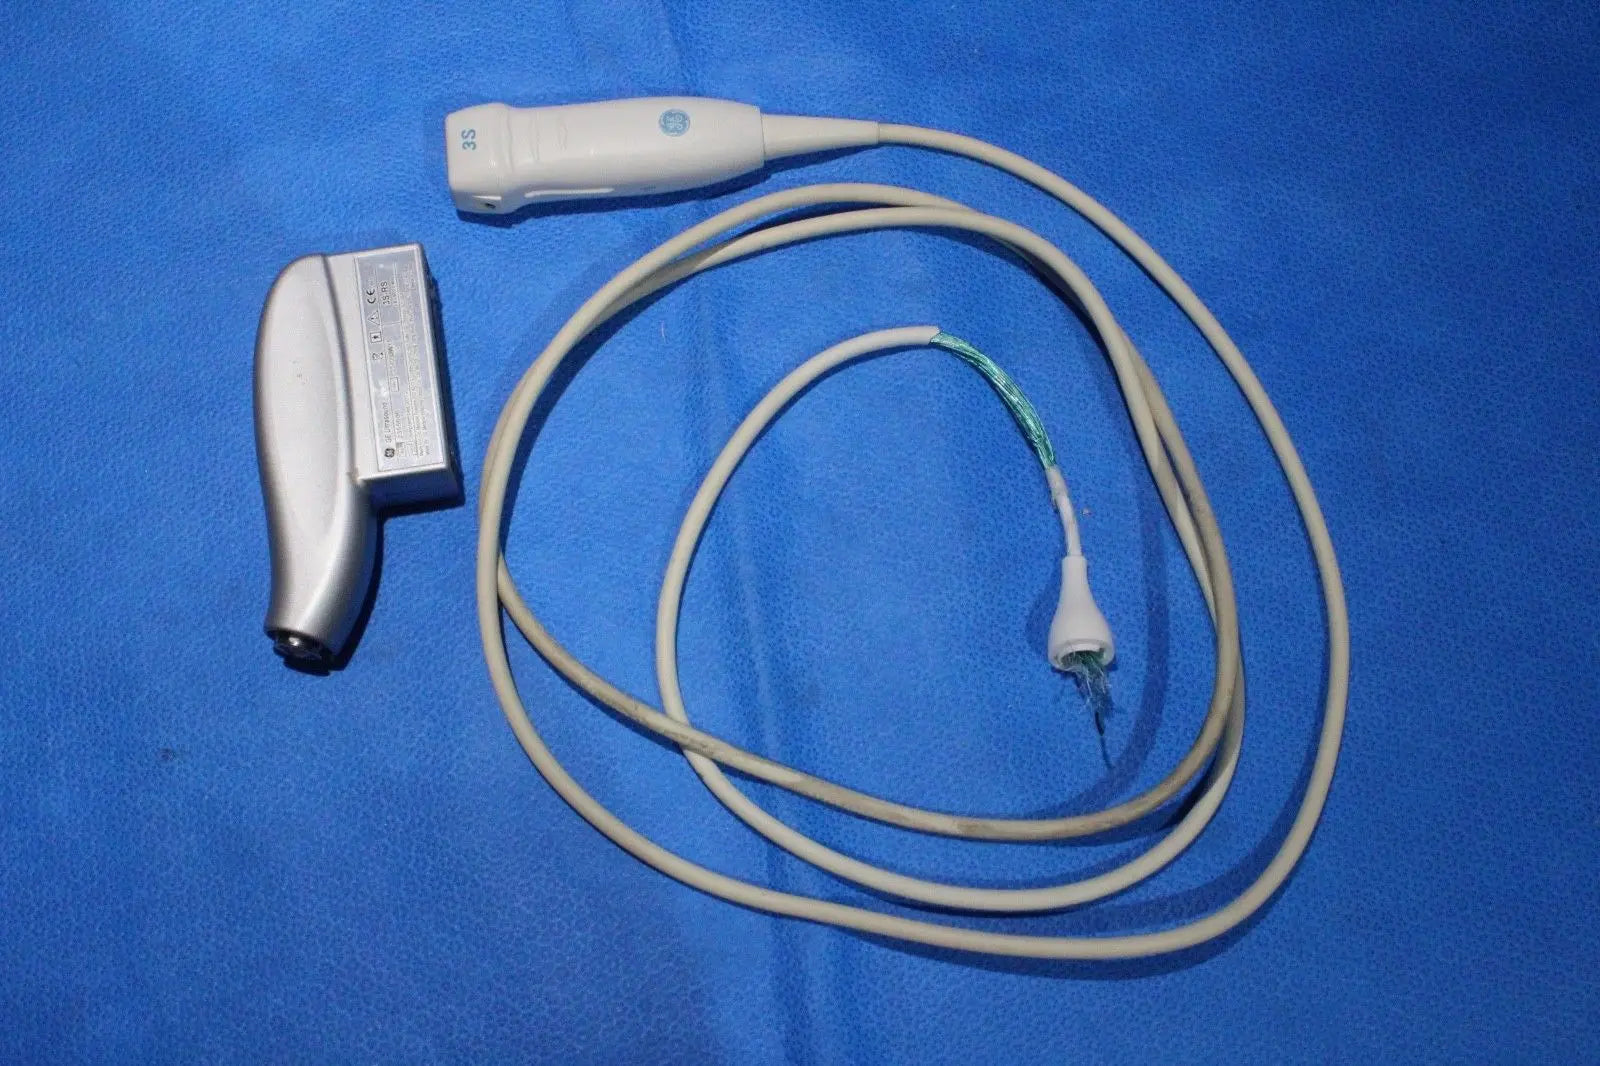 GE 3S-RS Ultrasound Transducer / Probe (Ref: 2355686) for parts only DIAGNOSTIC ULTRASOUND MACHINES FOR SALE